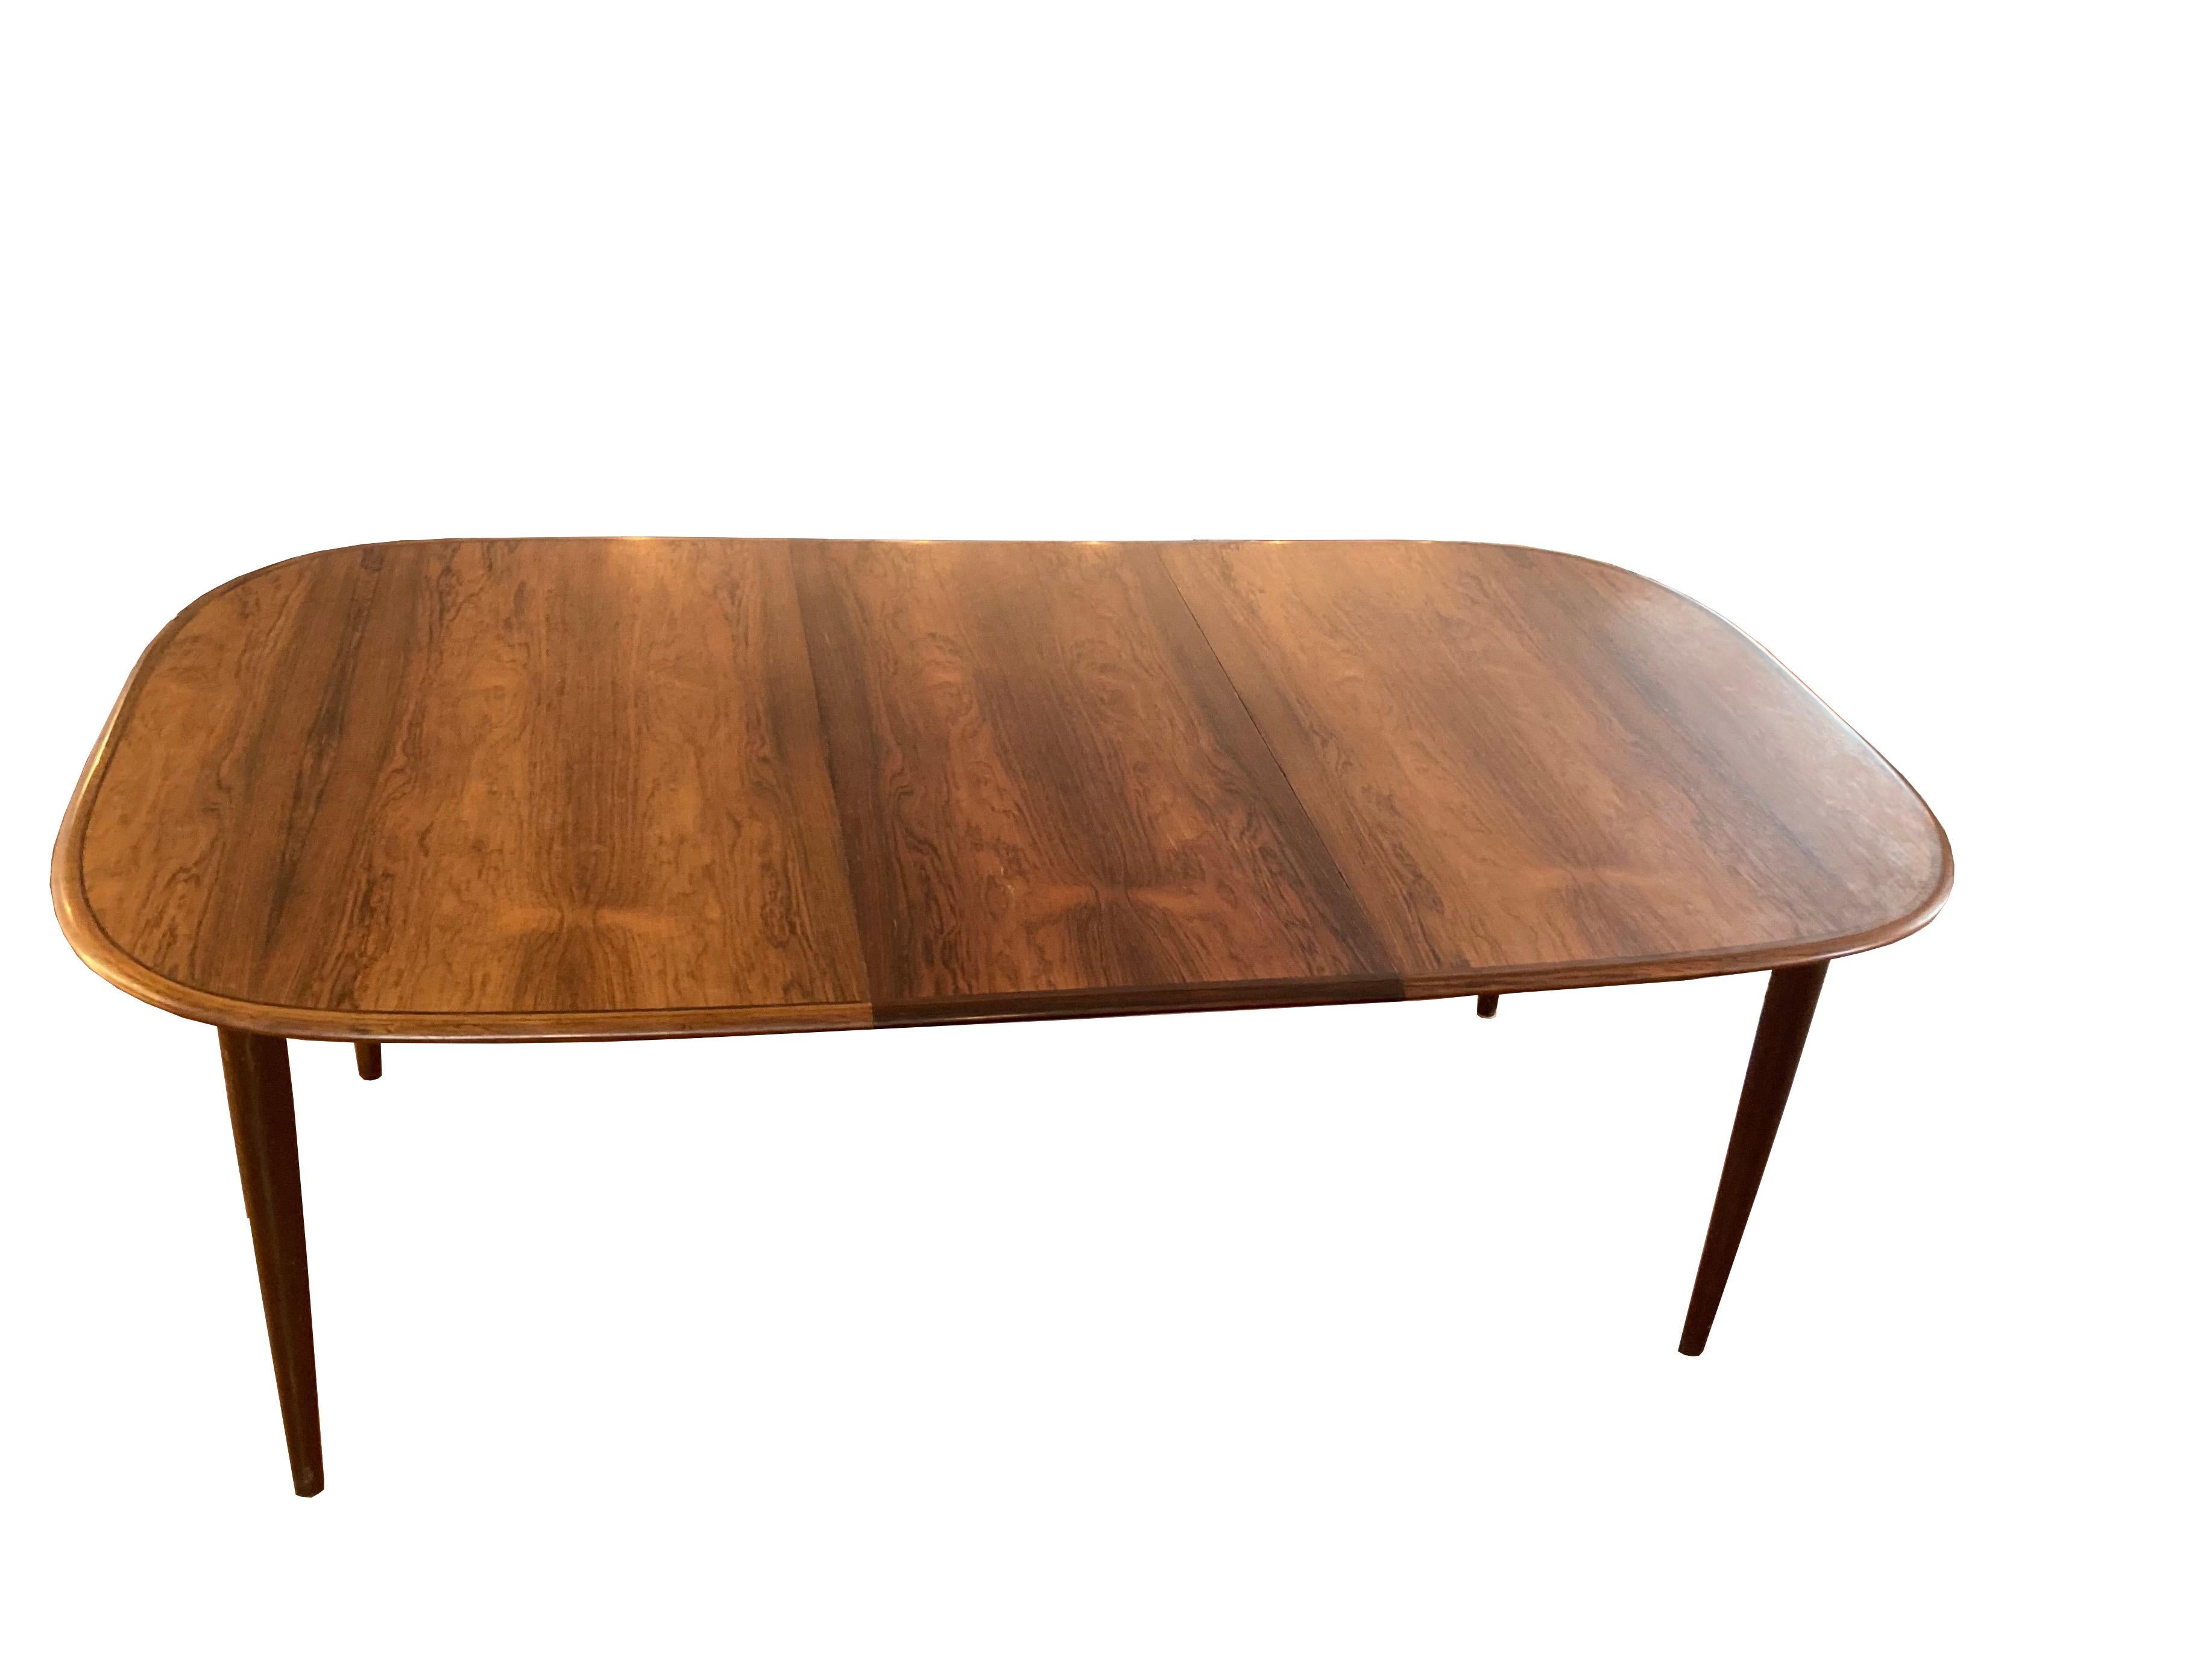 Danish rosewood dining table by Hans Skovmand, circa 1960
Edition Skovmand and Andersen.
2 extensions included (50 cm each)
Very good state, very good work.